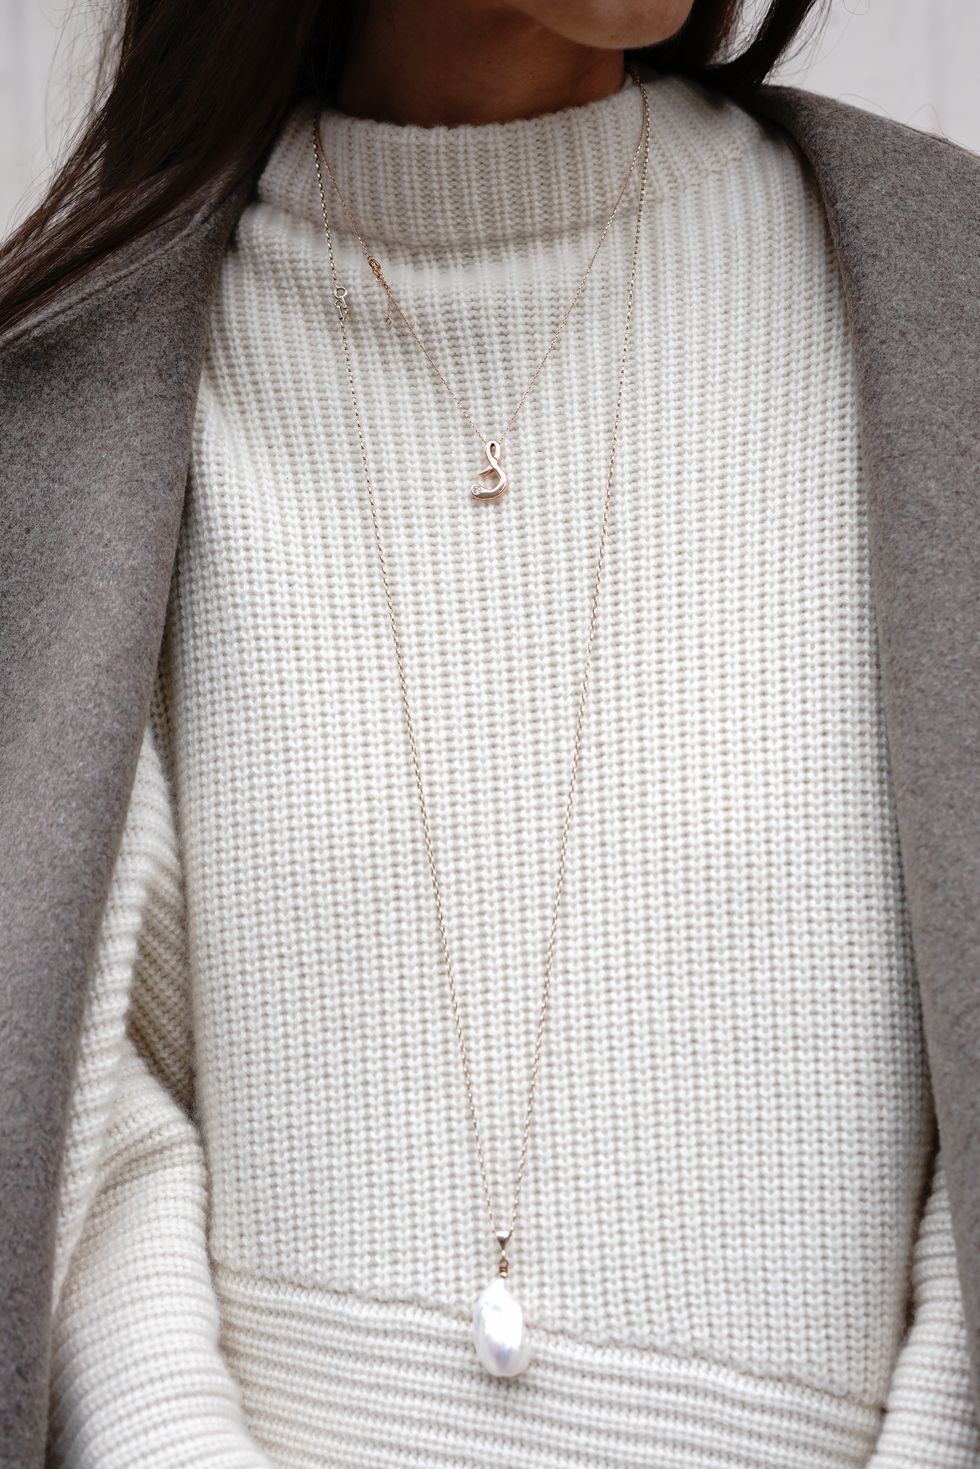 White, Neck, Clothing, Necklace, Outerwear, Jewellery, Fashion accessory, Beige, Sweater, Pearl, 